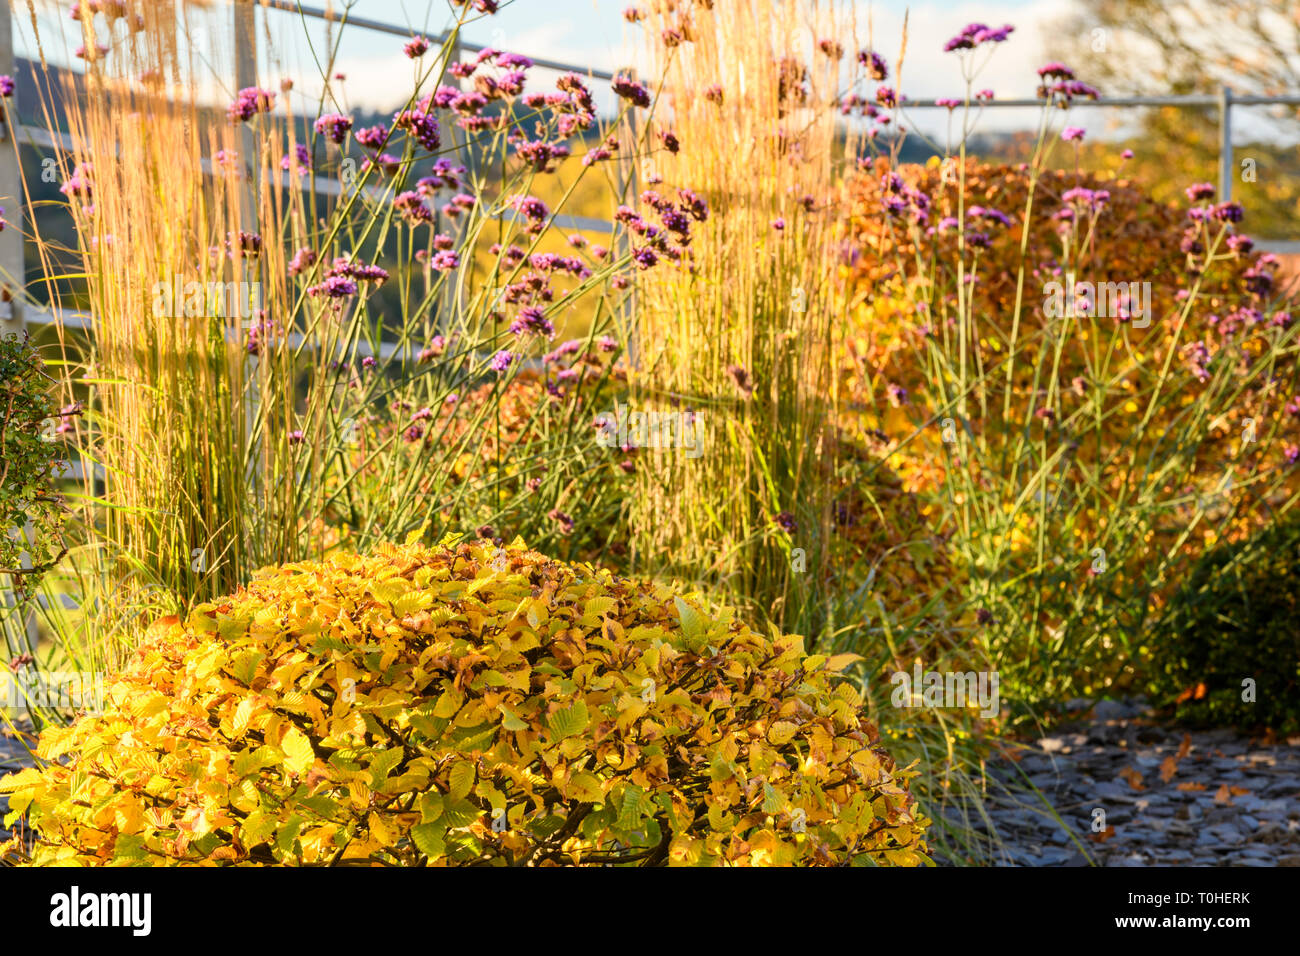 Autumn colour in beautiful private garden - stylish, contemporary design, landscaping, planting & slate chips on border (rural Yorkshire, England, UK) Stock Photo